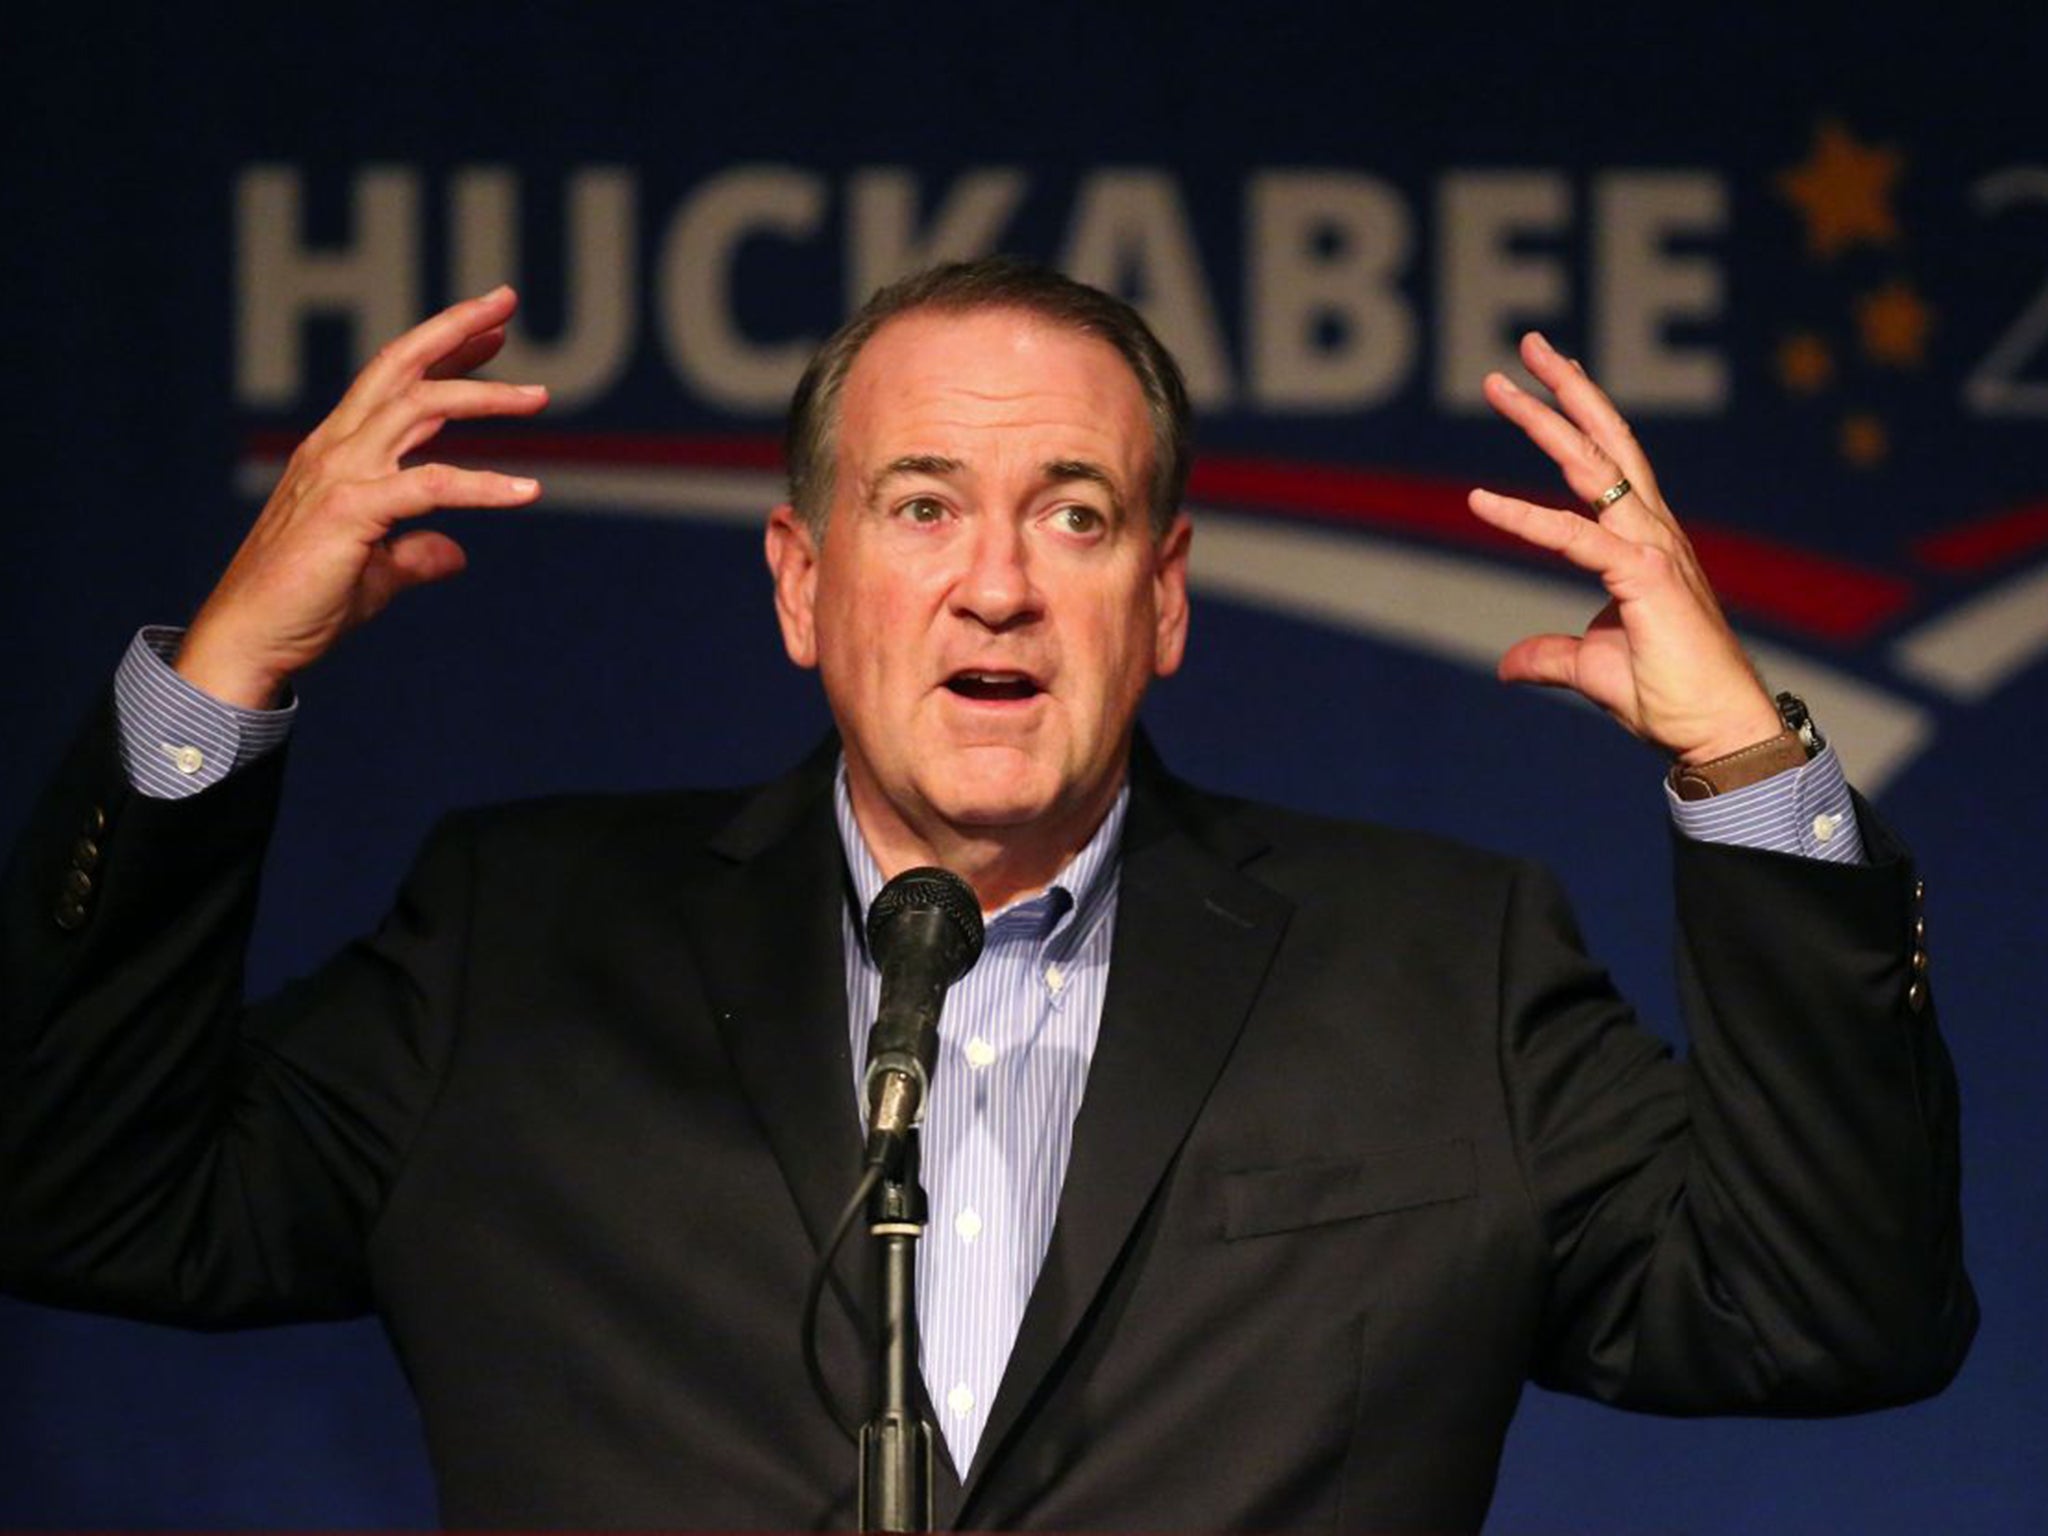 Mike Huckabee suggests mass shootings in America are due to a lack of moral compass rather than access to assault-style weaponry